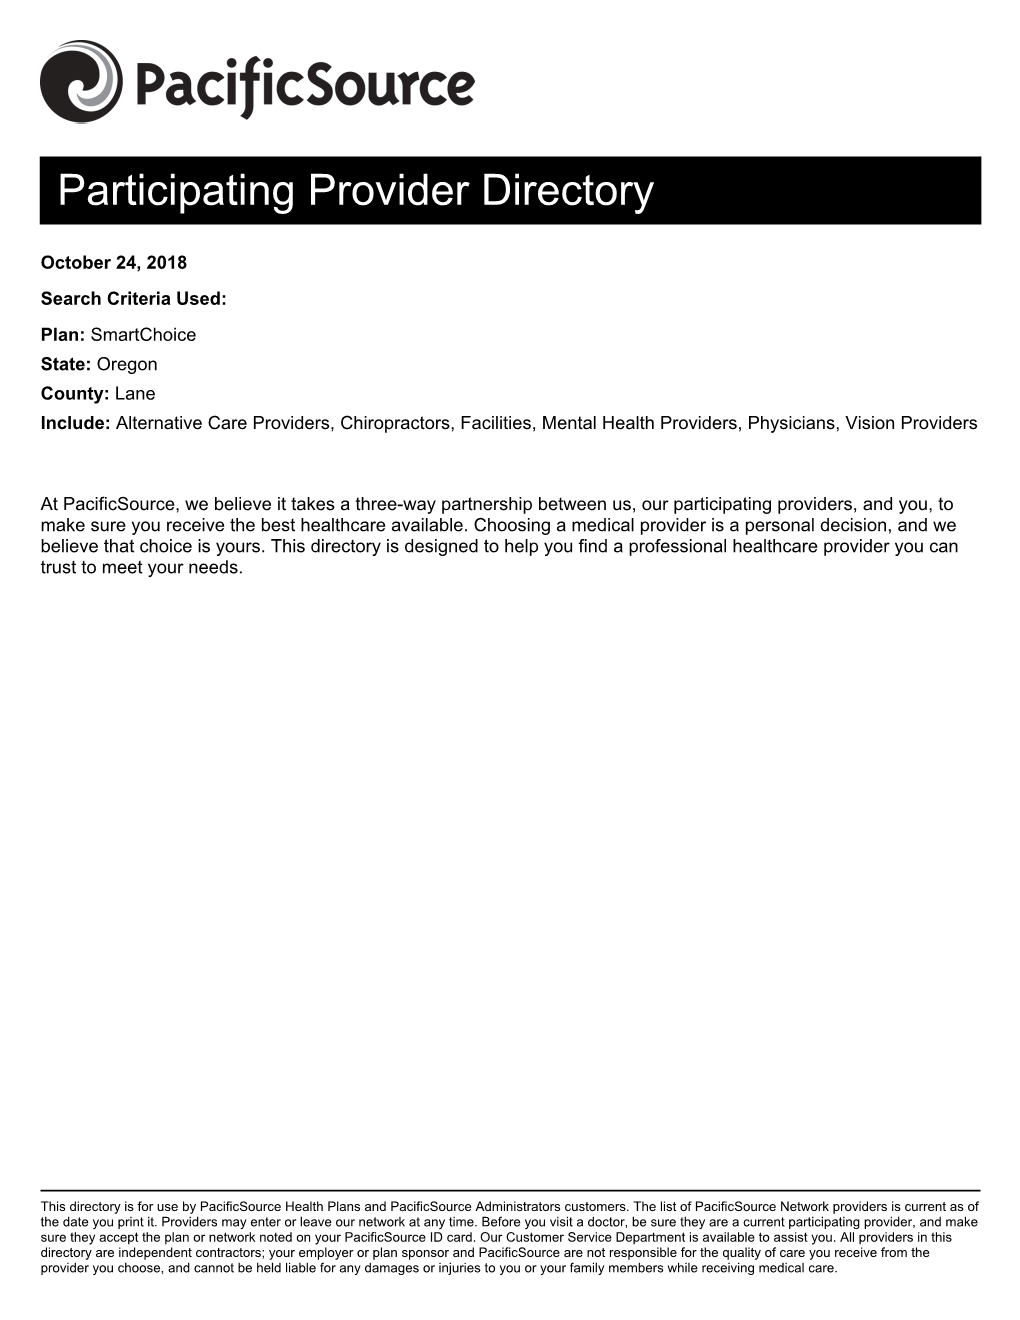 Pacificsource Provider Directory